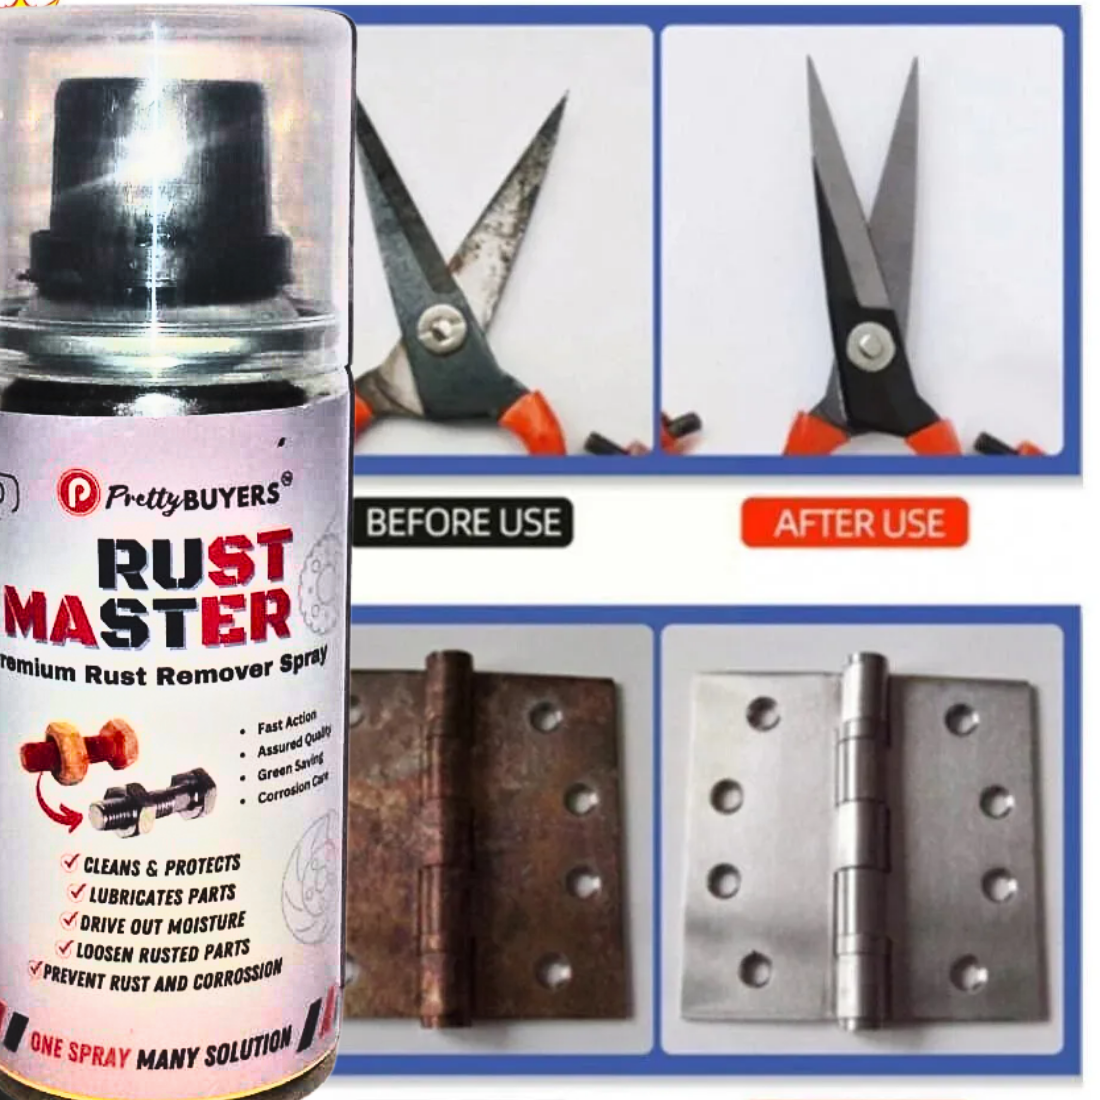 PrettyBUYERS RUST Master - Instant Rust Remover Spray (150 mlx5) | Removes Rust | Protects from Corrosion